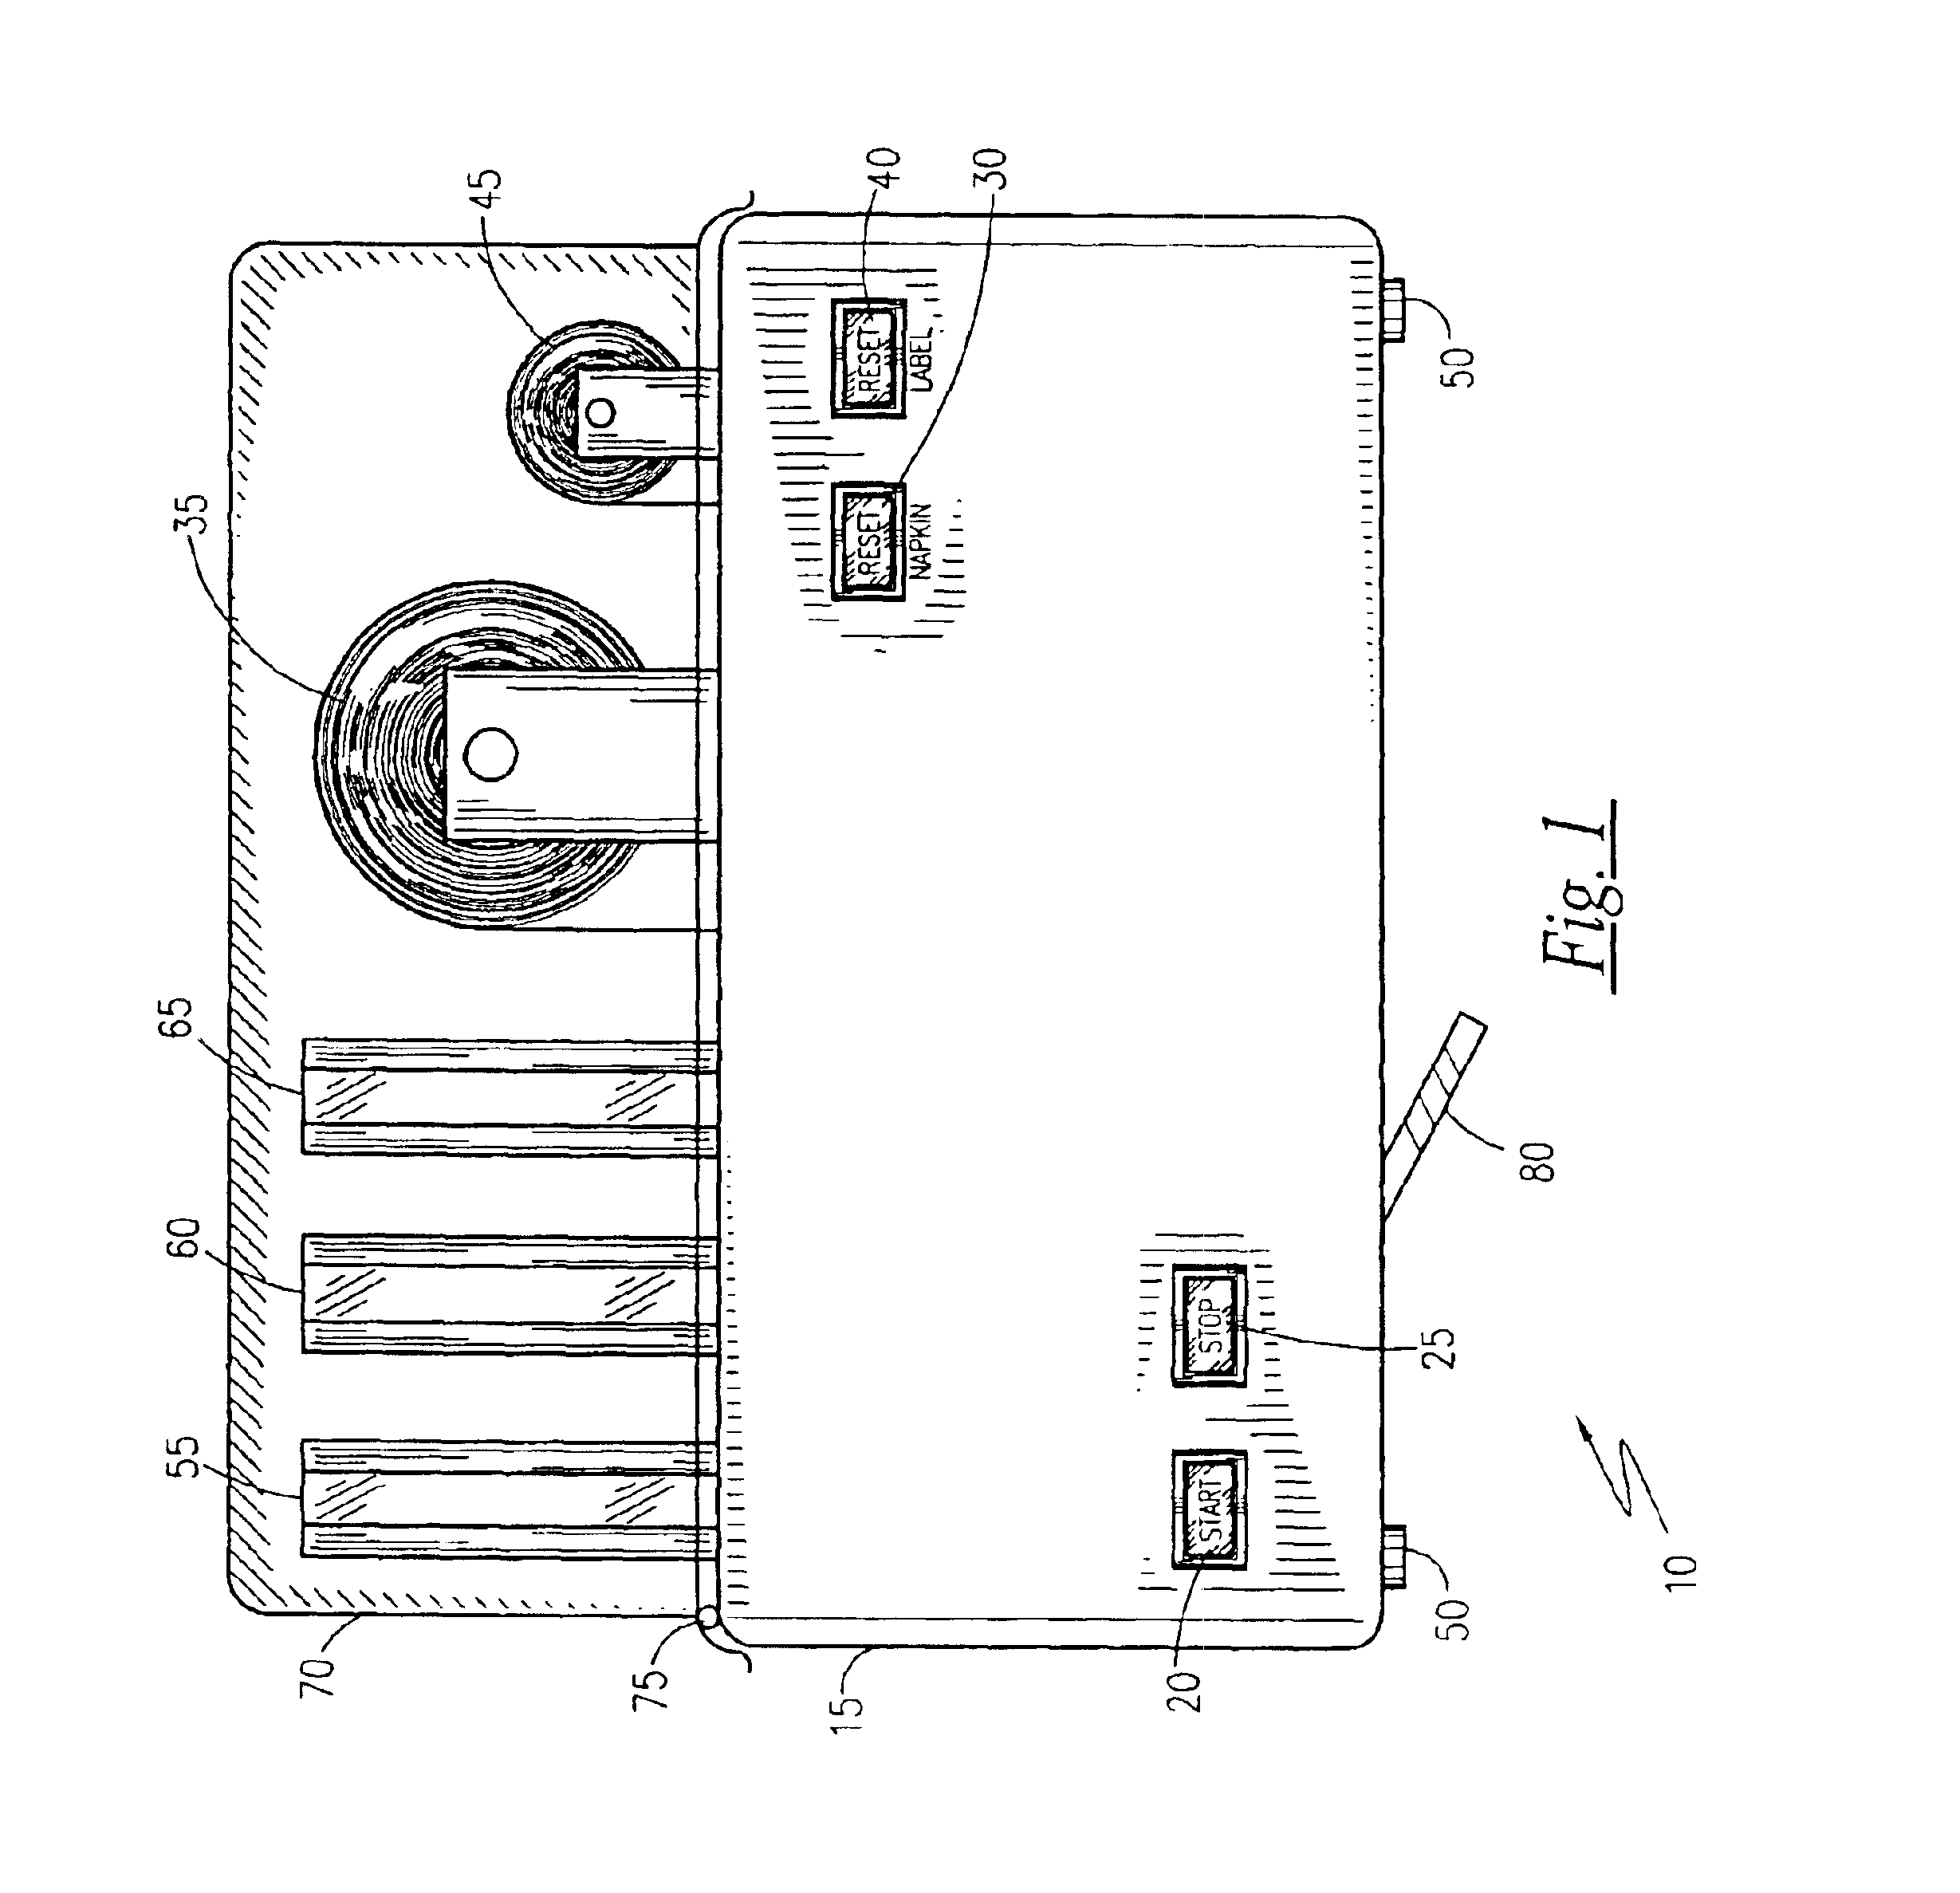 Automated flatware and napkin assembling apparatus